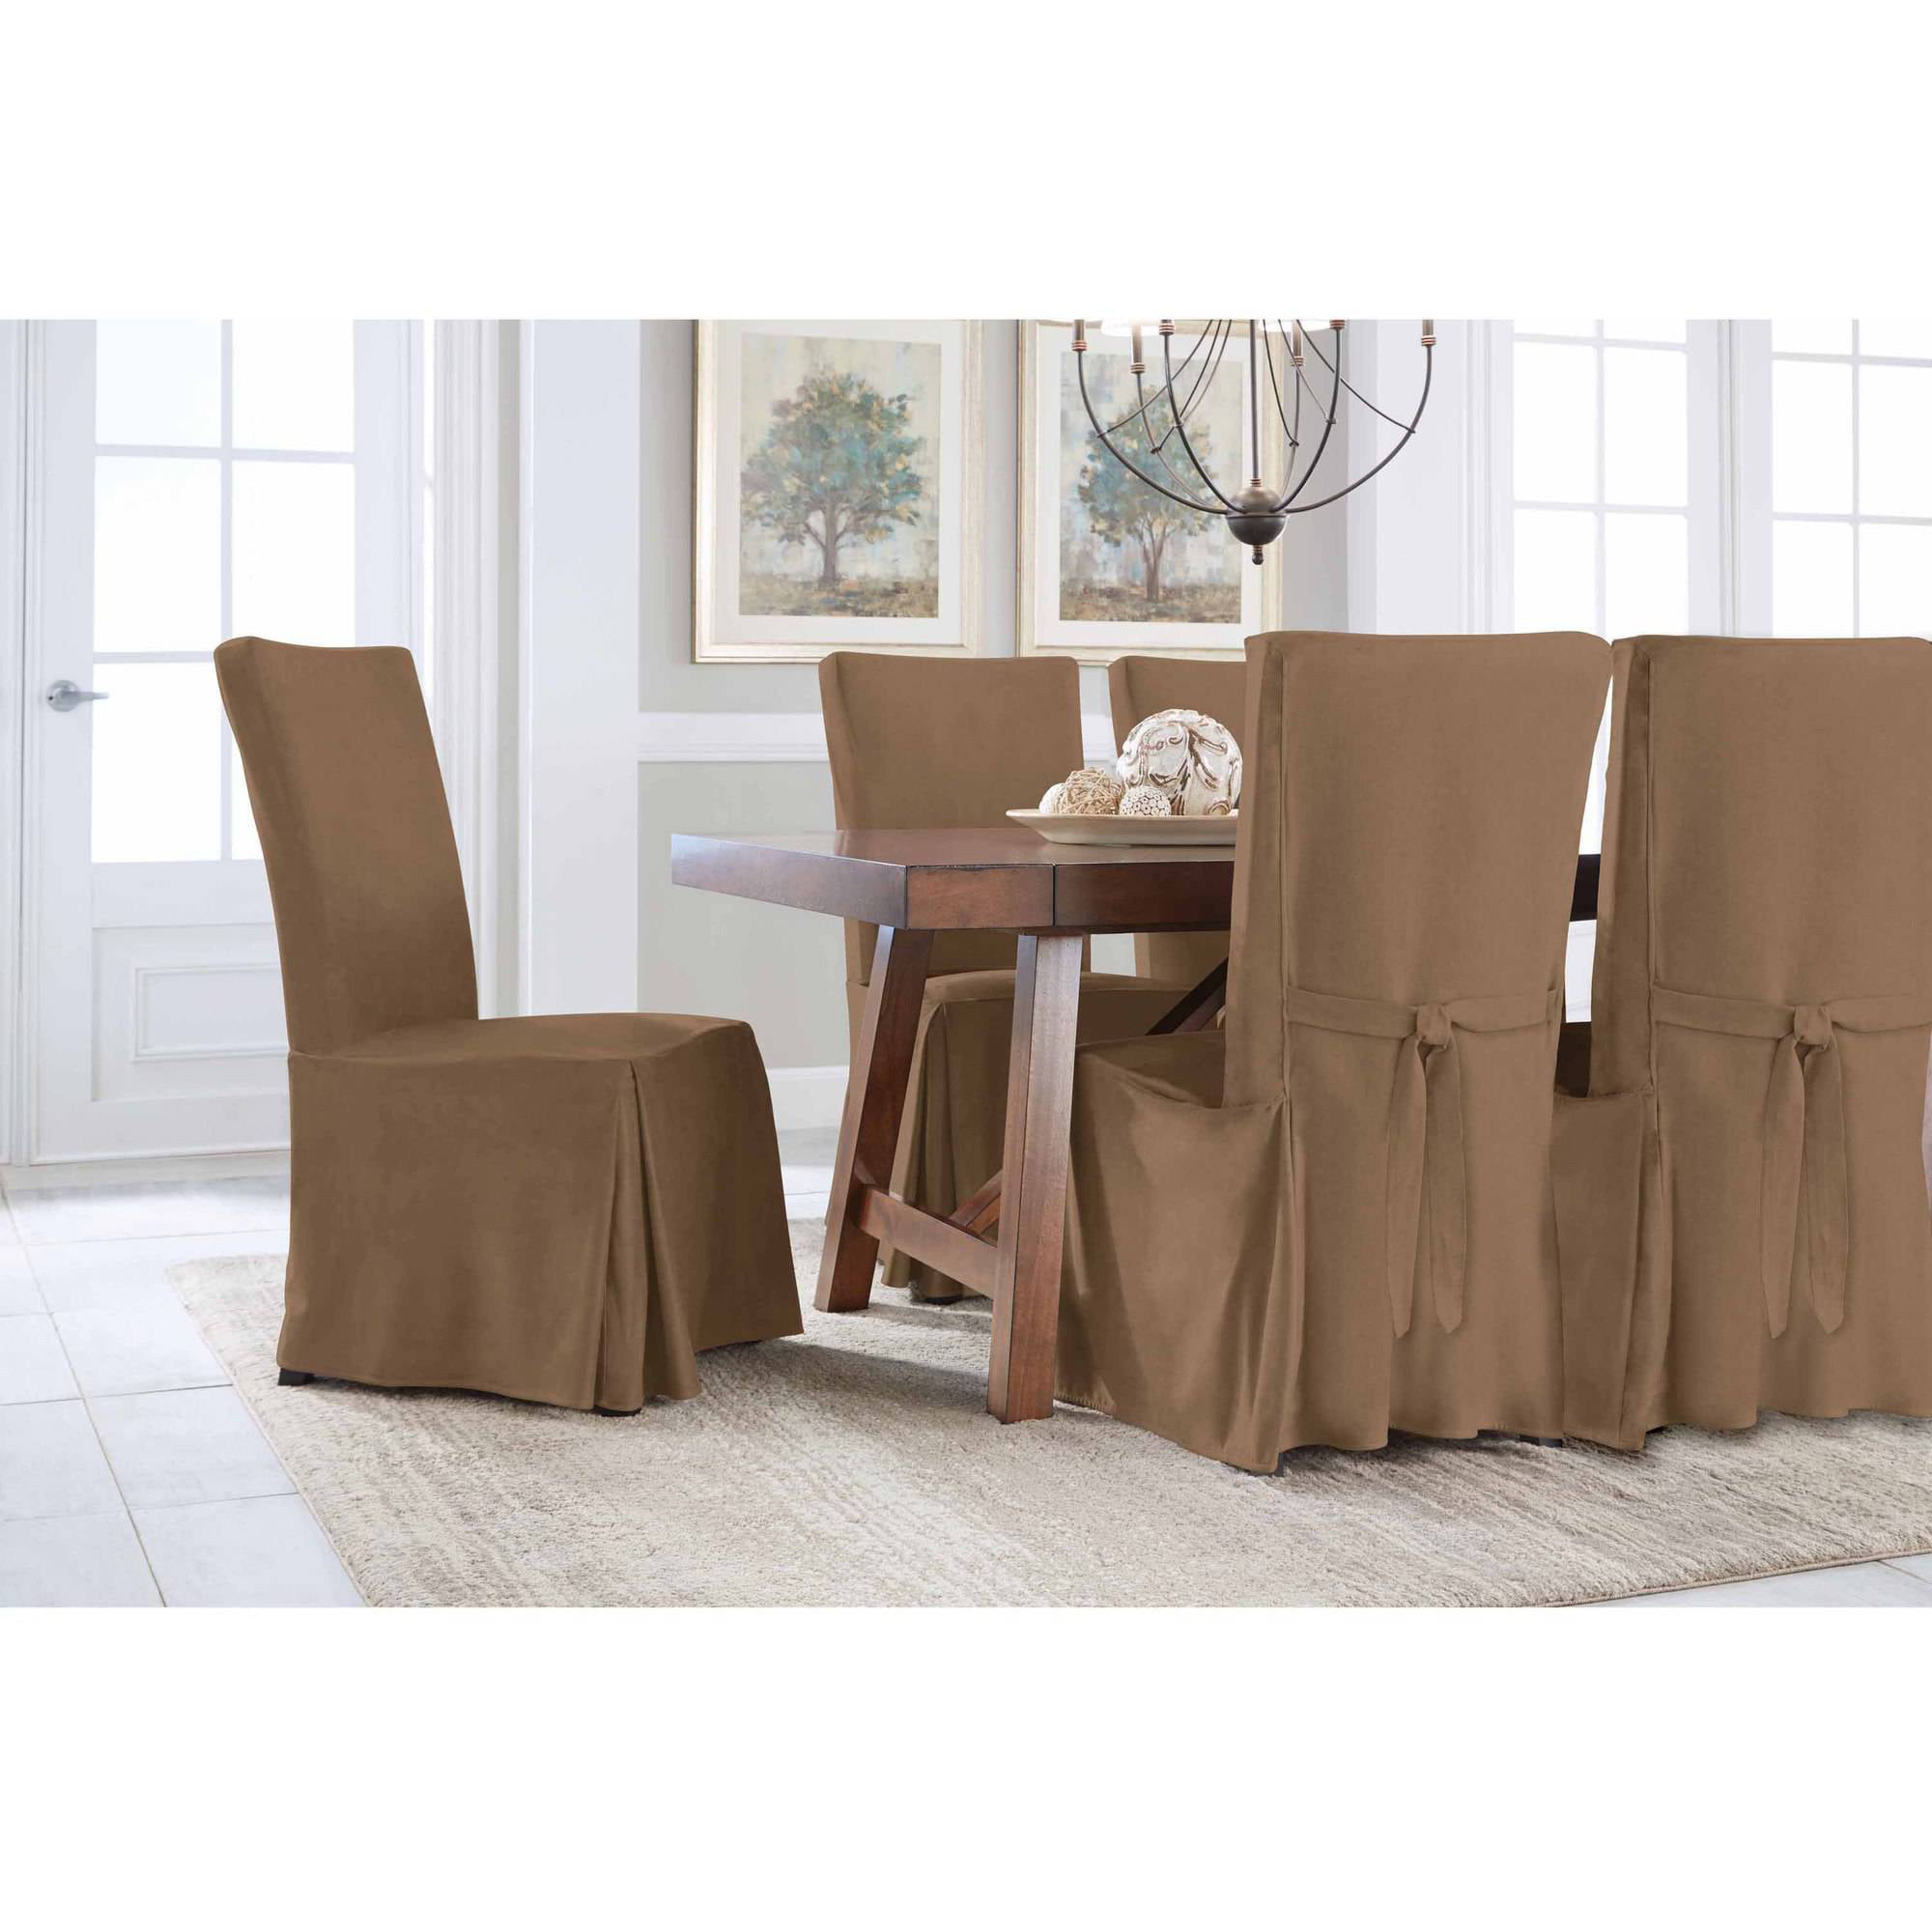 Serta Relaxed Fit Smooth Suede Furniture Slipcover 2 Pack Dining Parsons Chair Long Skirt Walmart Com Walmart Com